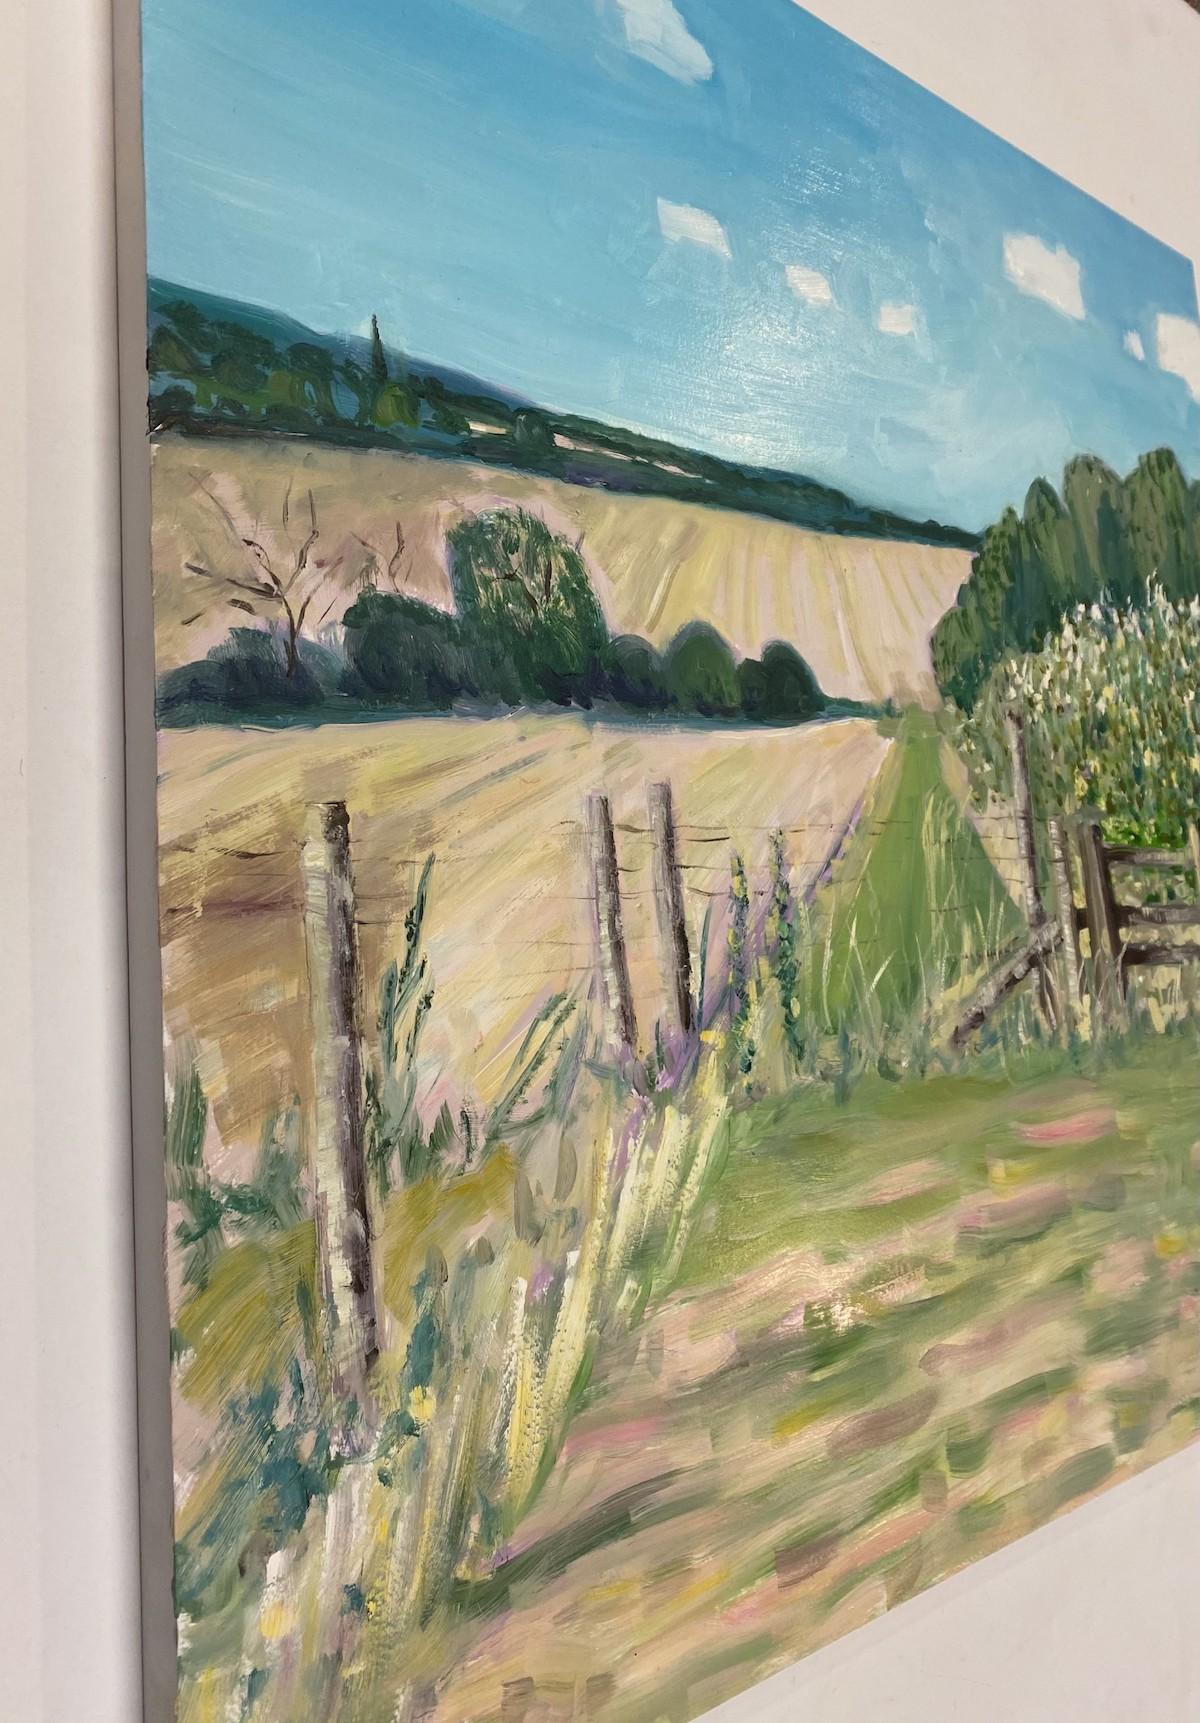 Walking out from Aynho, Eleanor Woolley, Original Landscape painting for sale - Impressionist Painting by Eleanor Woolley 